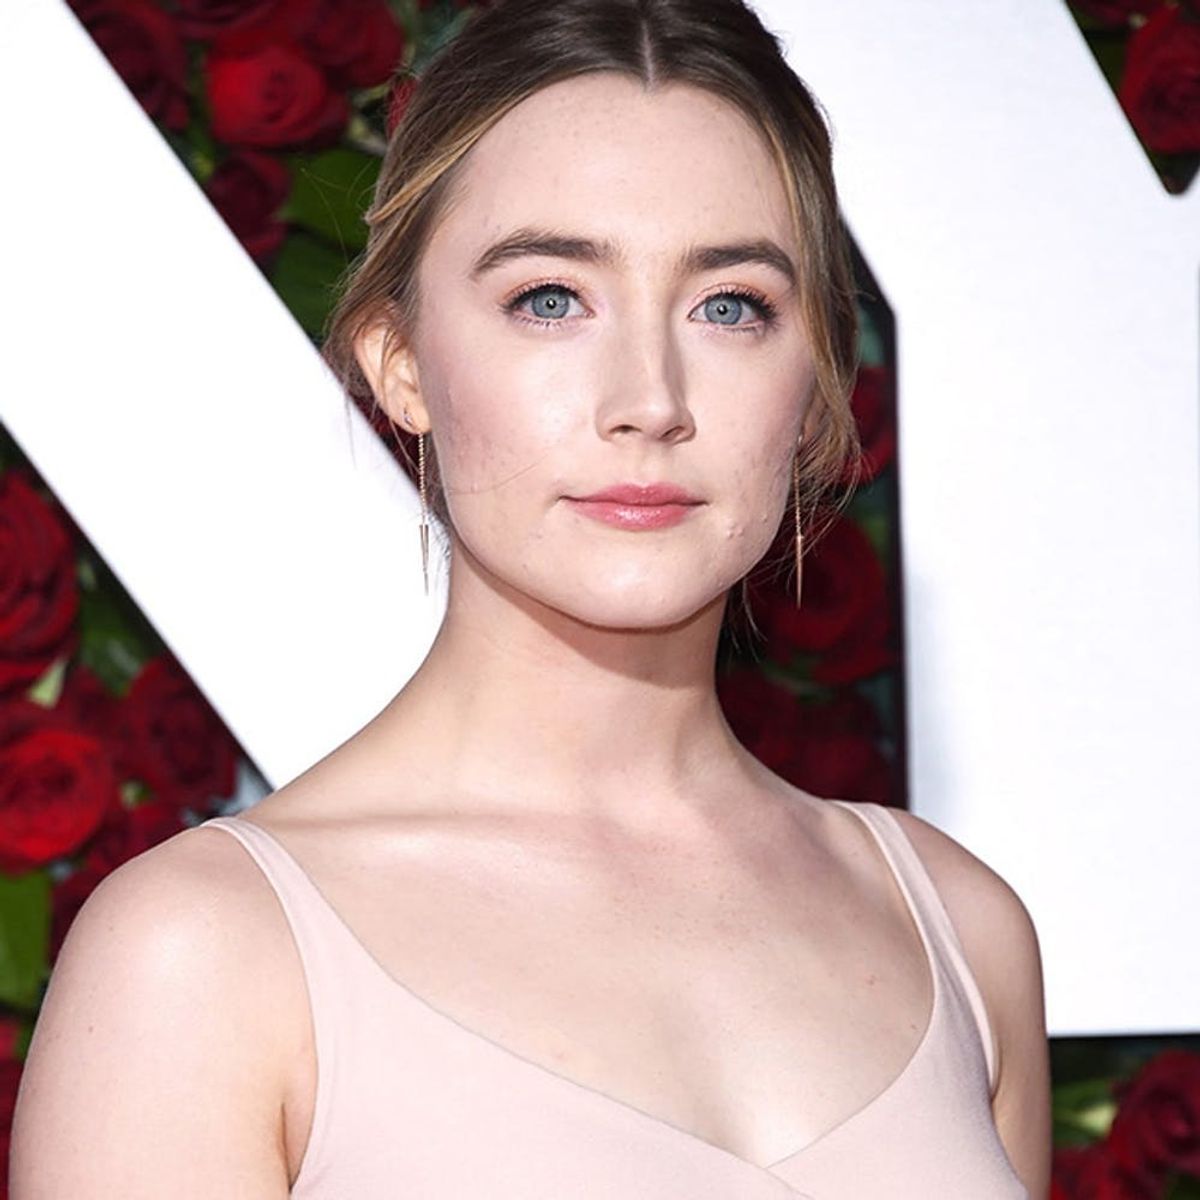 Saoirse Ronan Just Showed Us How to Rock Cutouts in a Modest Way